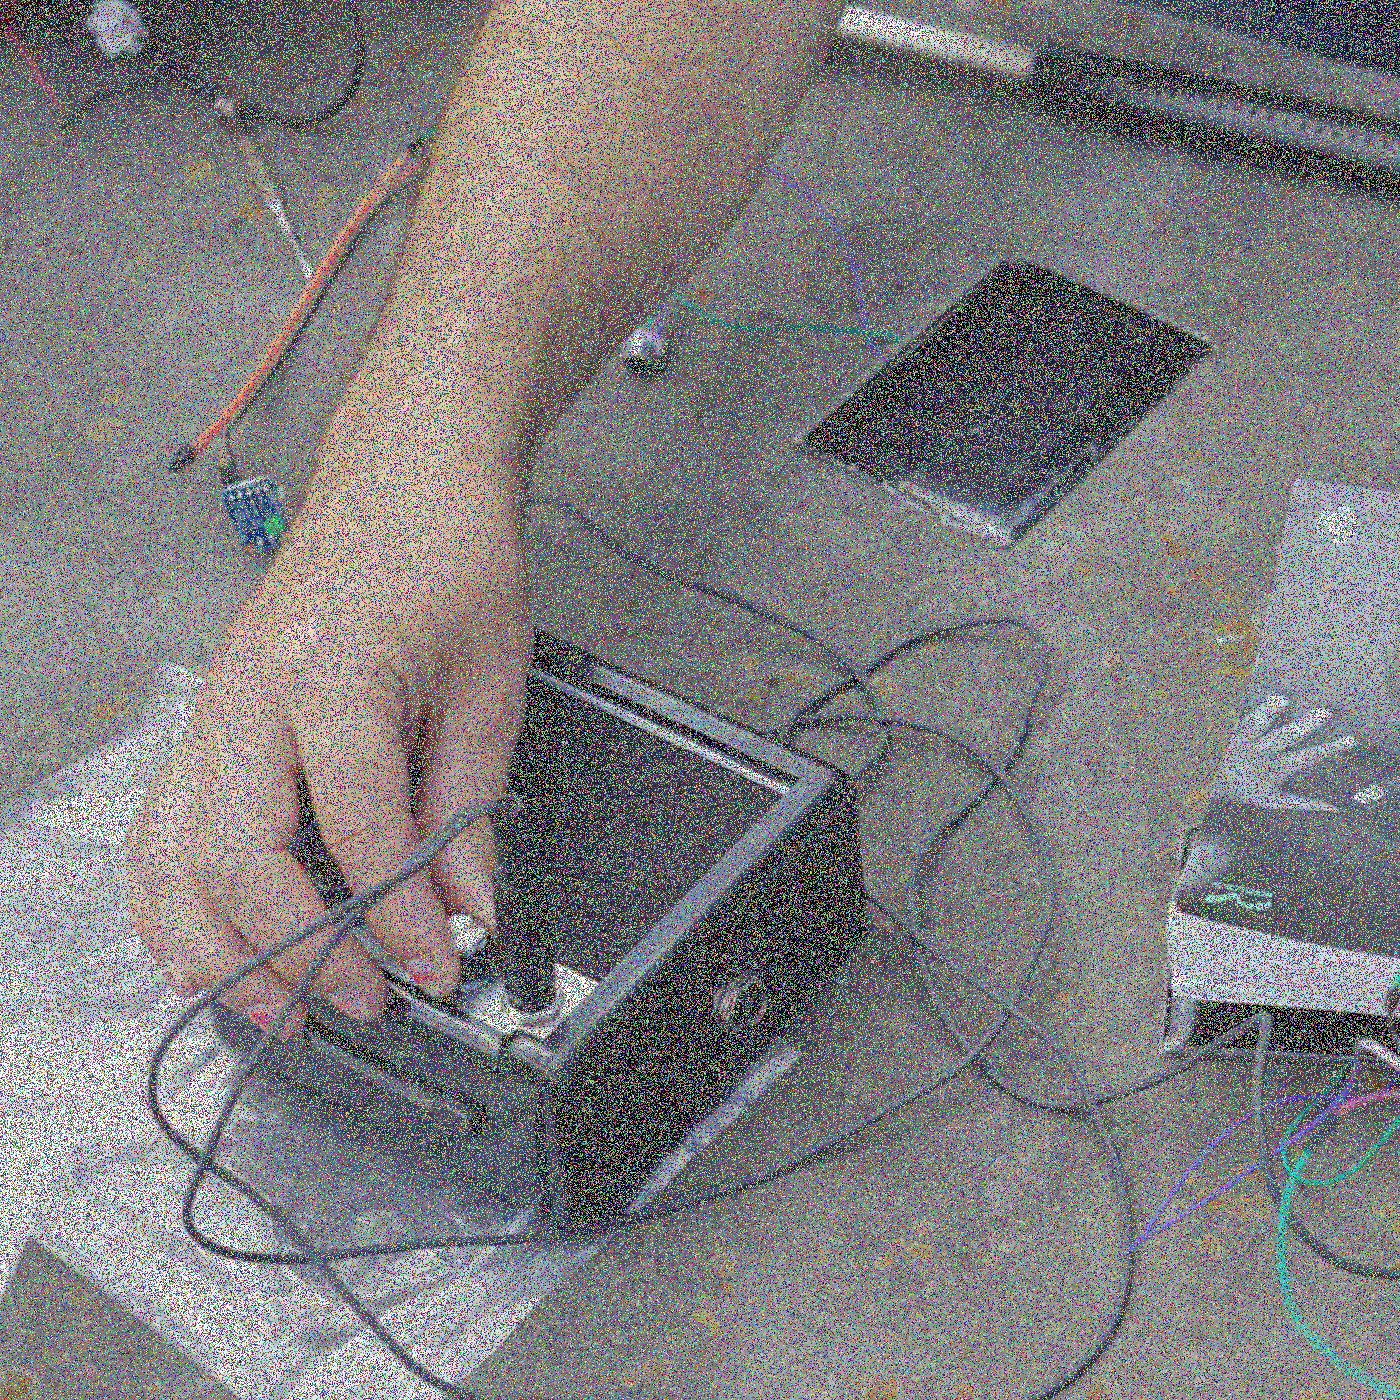 A hand is turning on knob on a speaker in a seemingly self-made sonic electronic circuit.